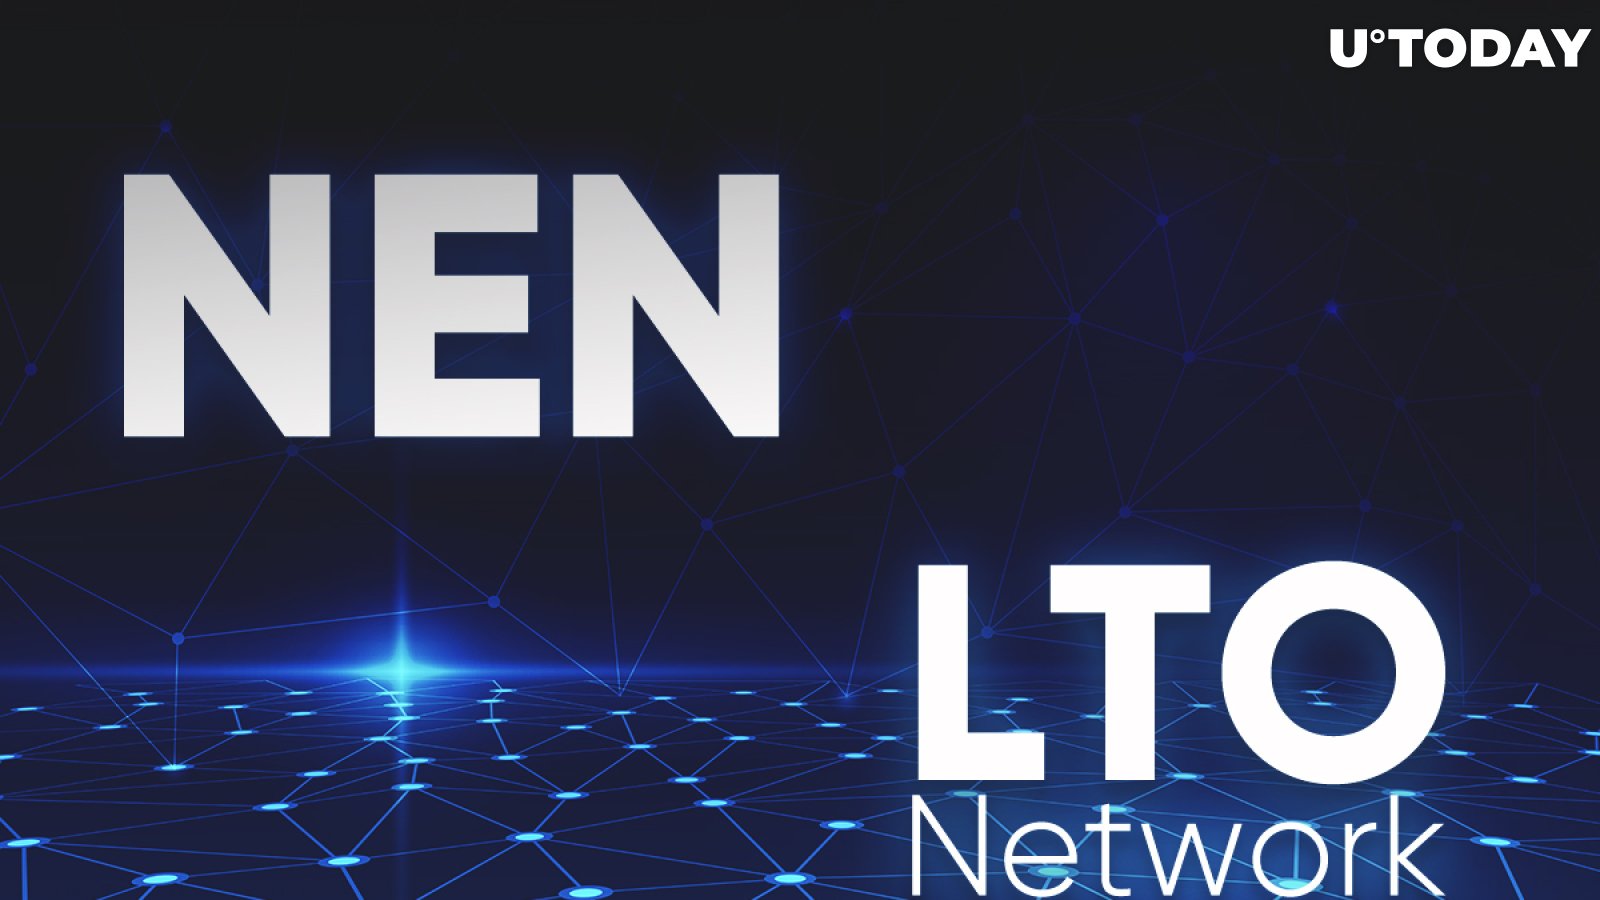 NEN Partners With LTO Network to Issue Instantly Verifiable Blockchain Certificates